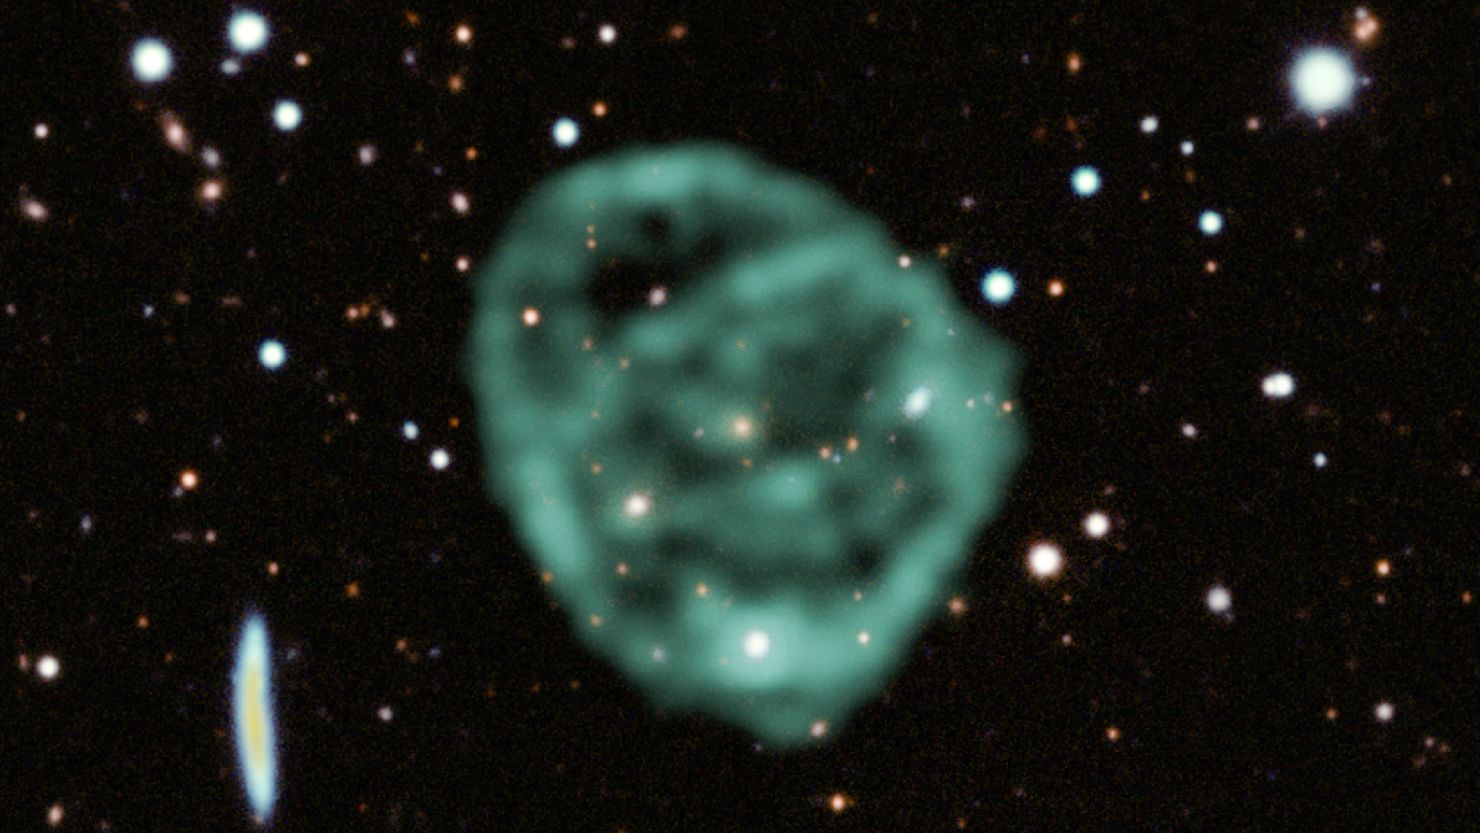 Data from SARAO's MeerKAT radio telescope data (green) showing the odd radio circles, is overlaid on optical and near infra-red data from the Dark Energy Survey.